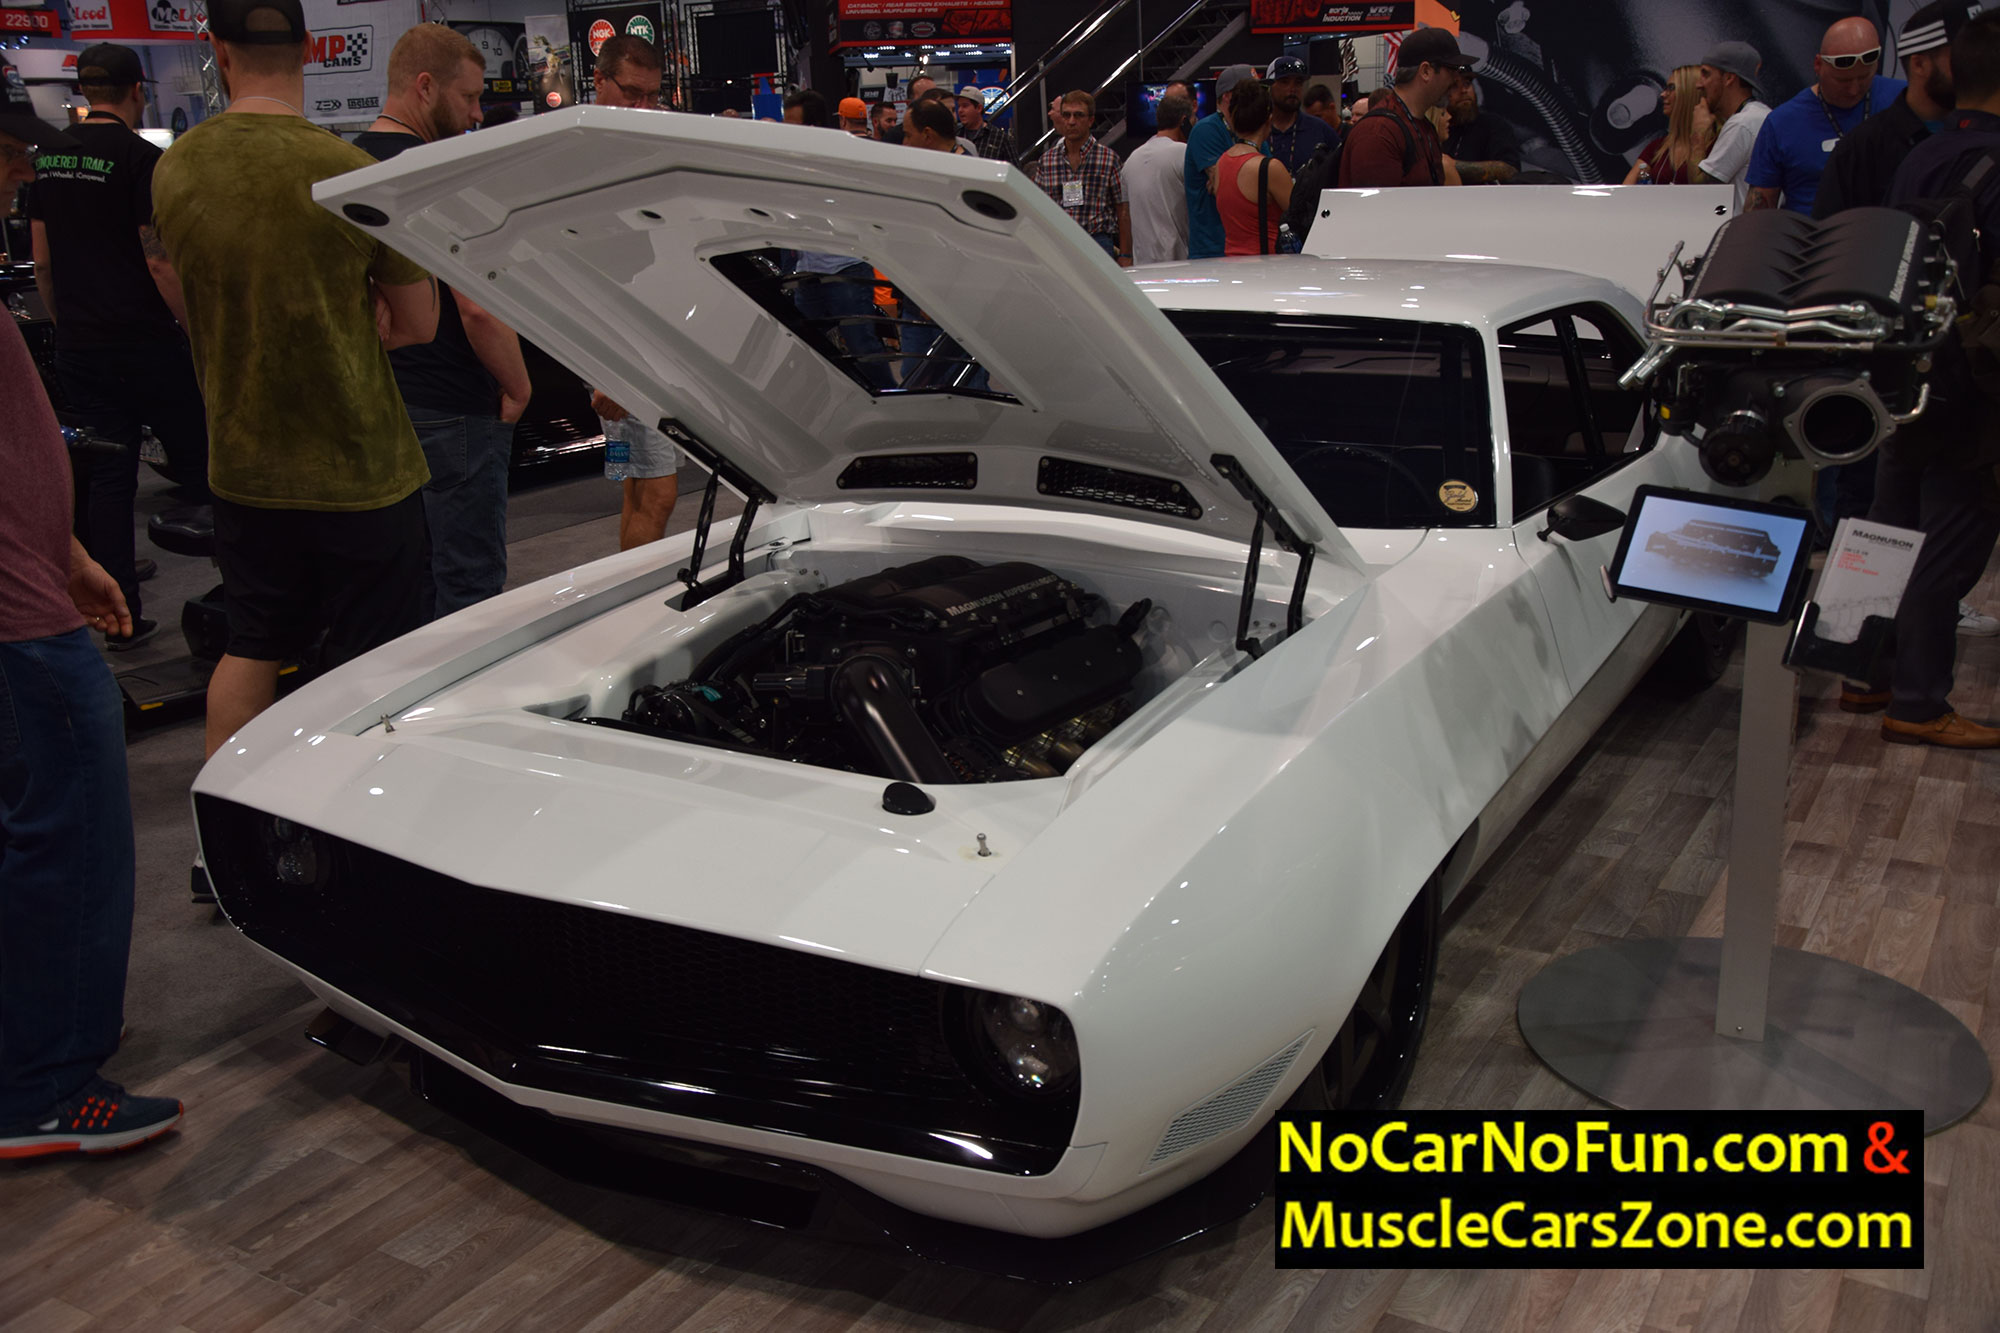 1969 Chevrolet Camaro by HED Industries 1 - Sema Show 2016 Vegas